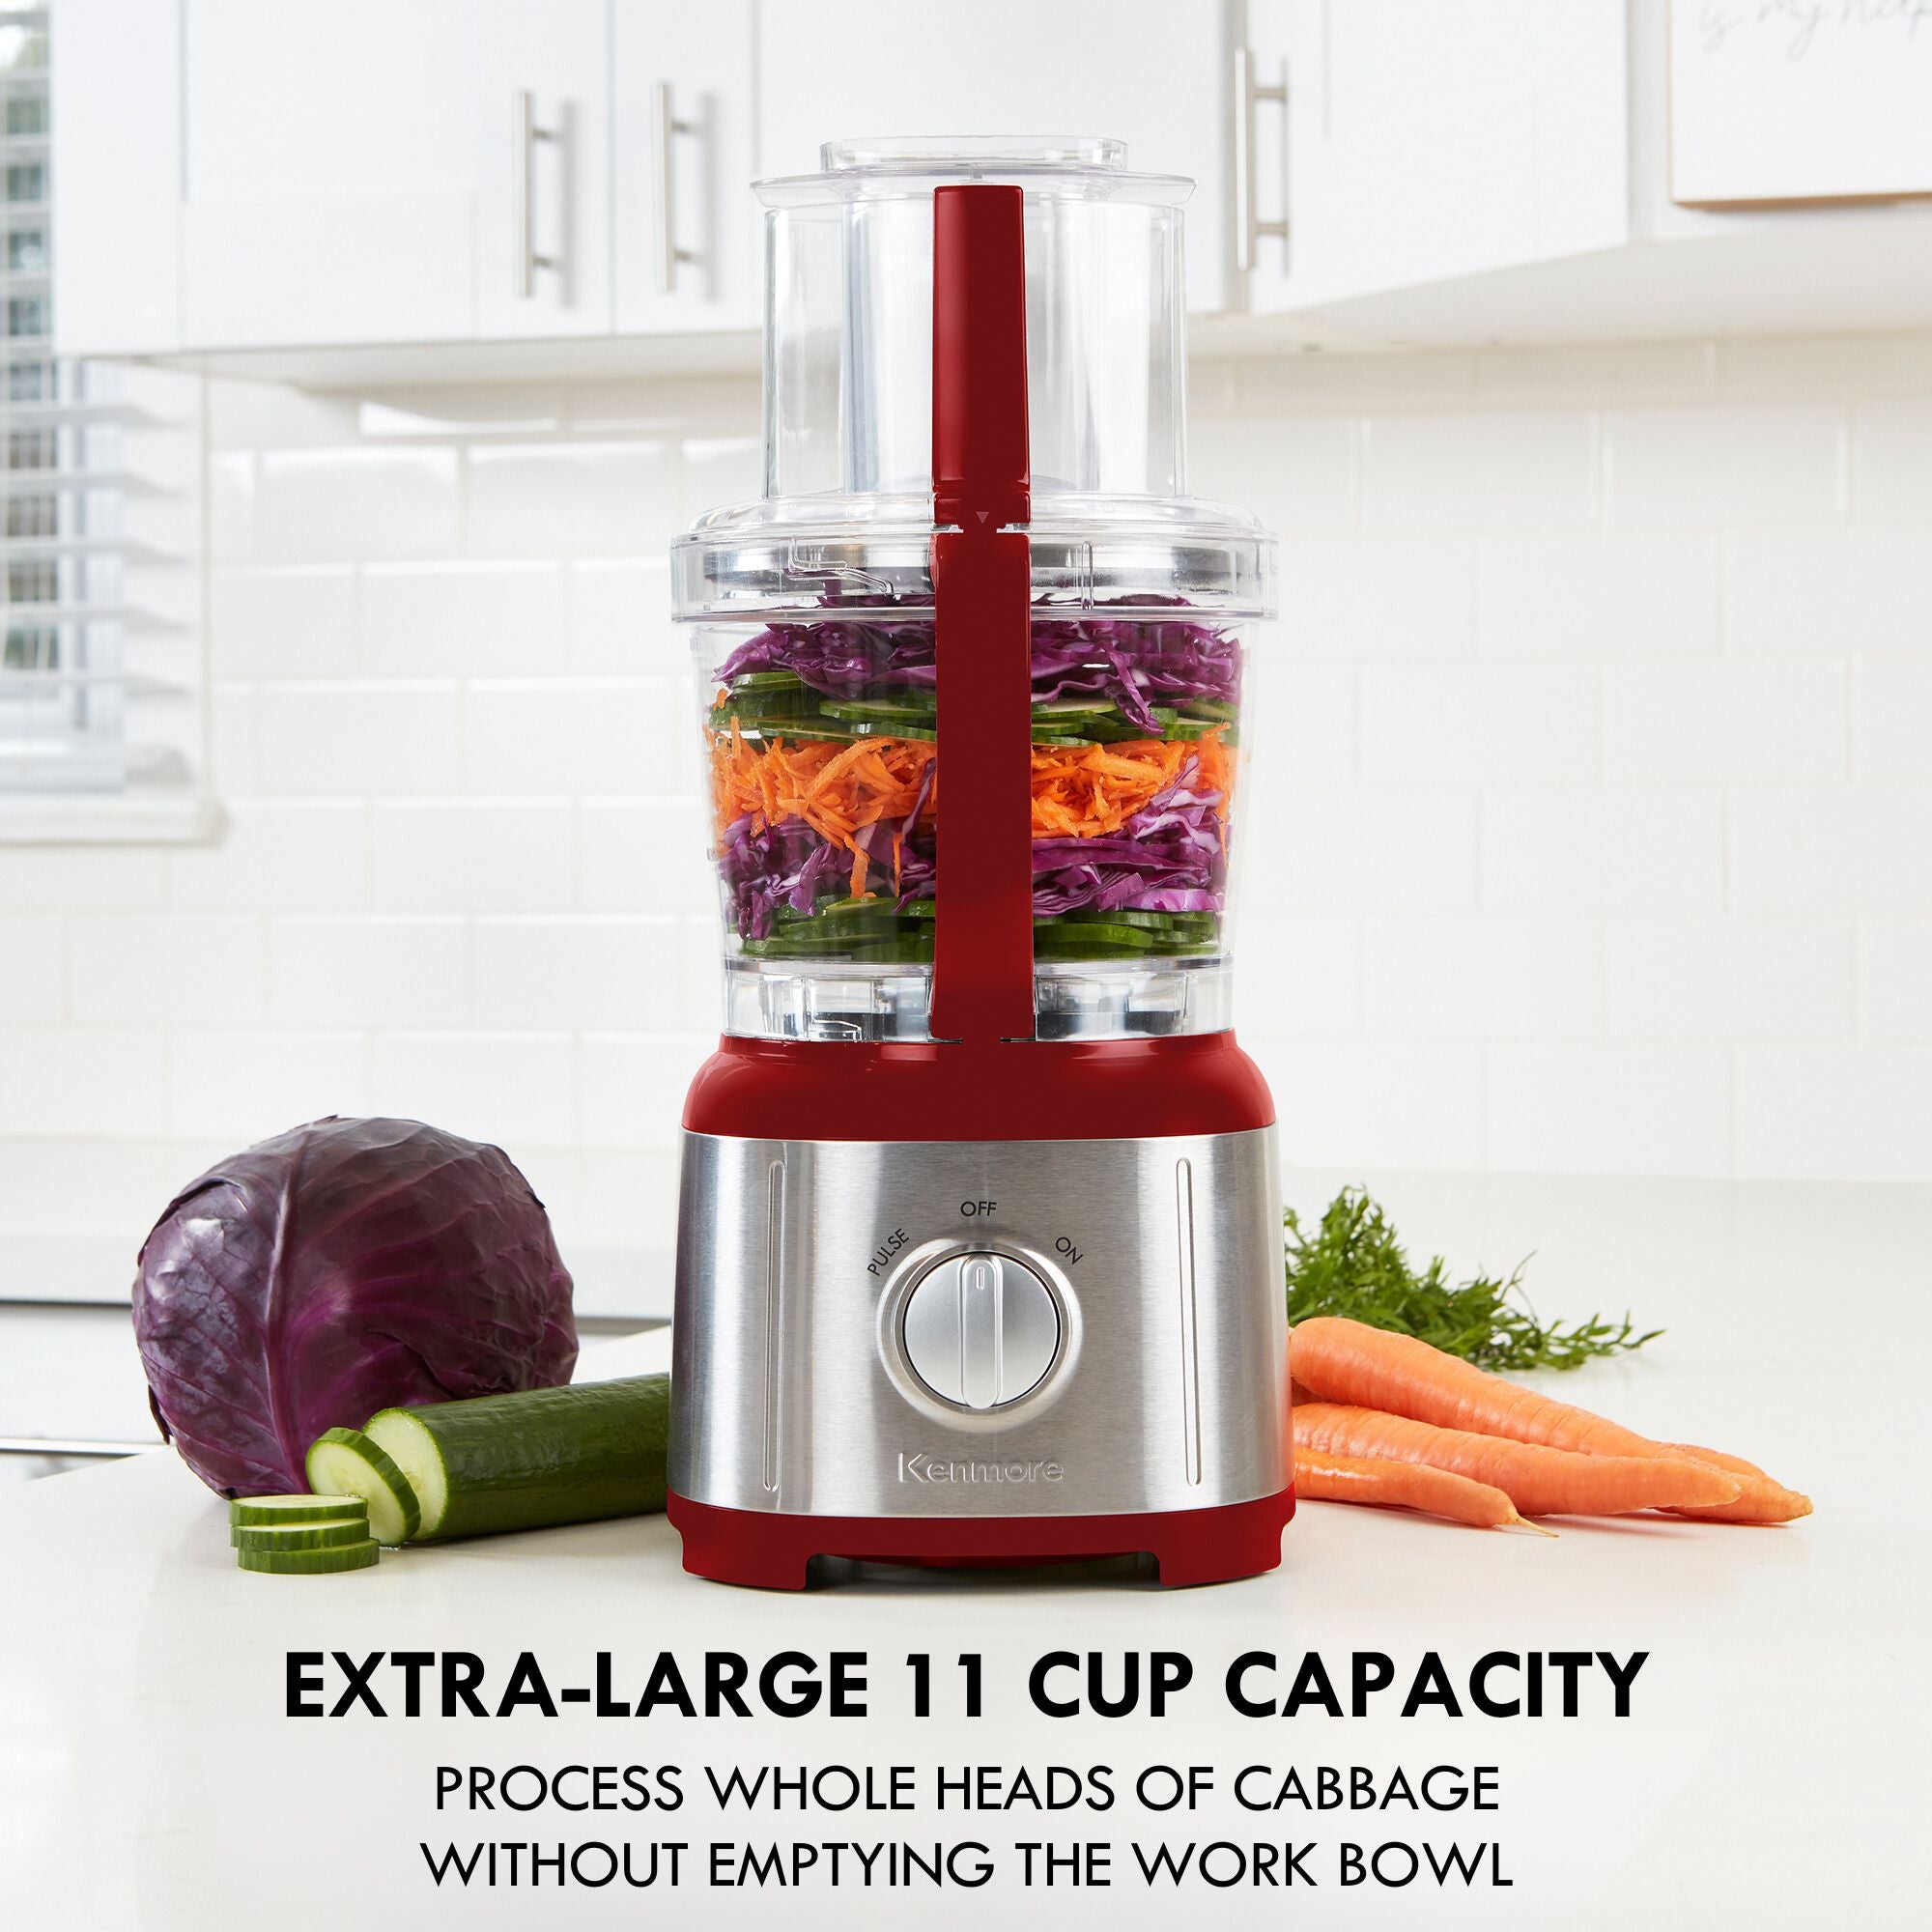 Kenmore 11 cup food processor and vegetable chopper on a light gray countertop with white tile backsplash and cupboards behind. There are chopped vegetables in the food processor and a whole red cabbage, partially sliced cucumber, carrots, and dill on either side. Text below reads, "Extra-large 11 cup capacity: Process whole heads of cabbage without emptying the work bowl"